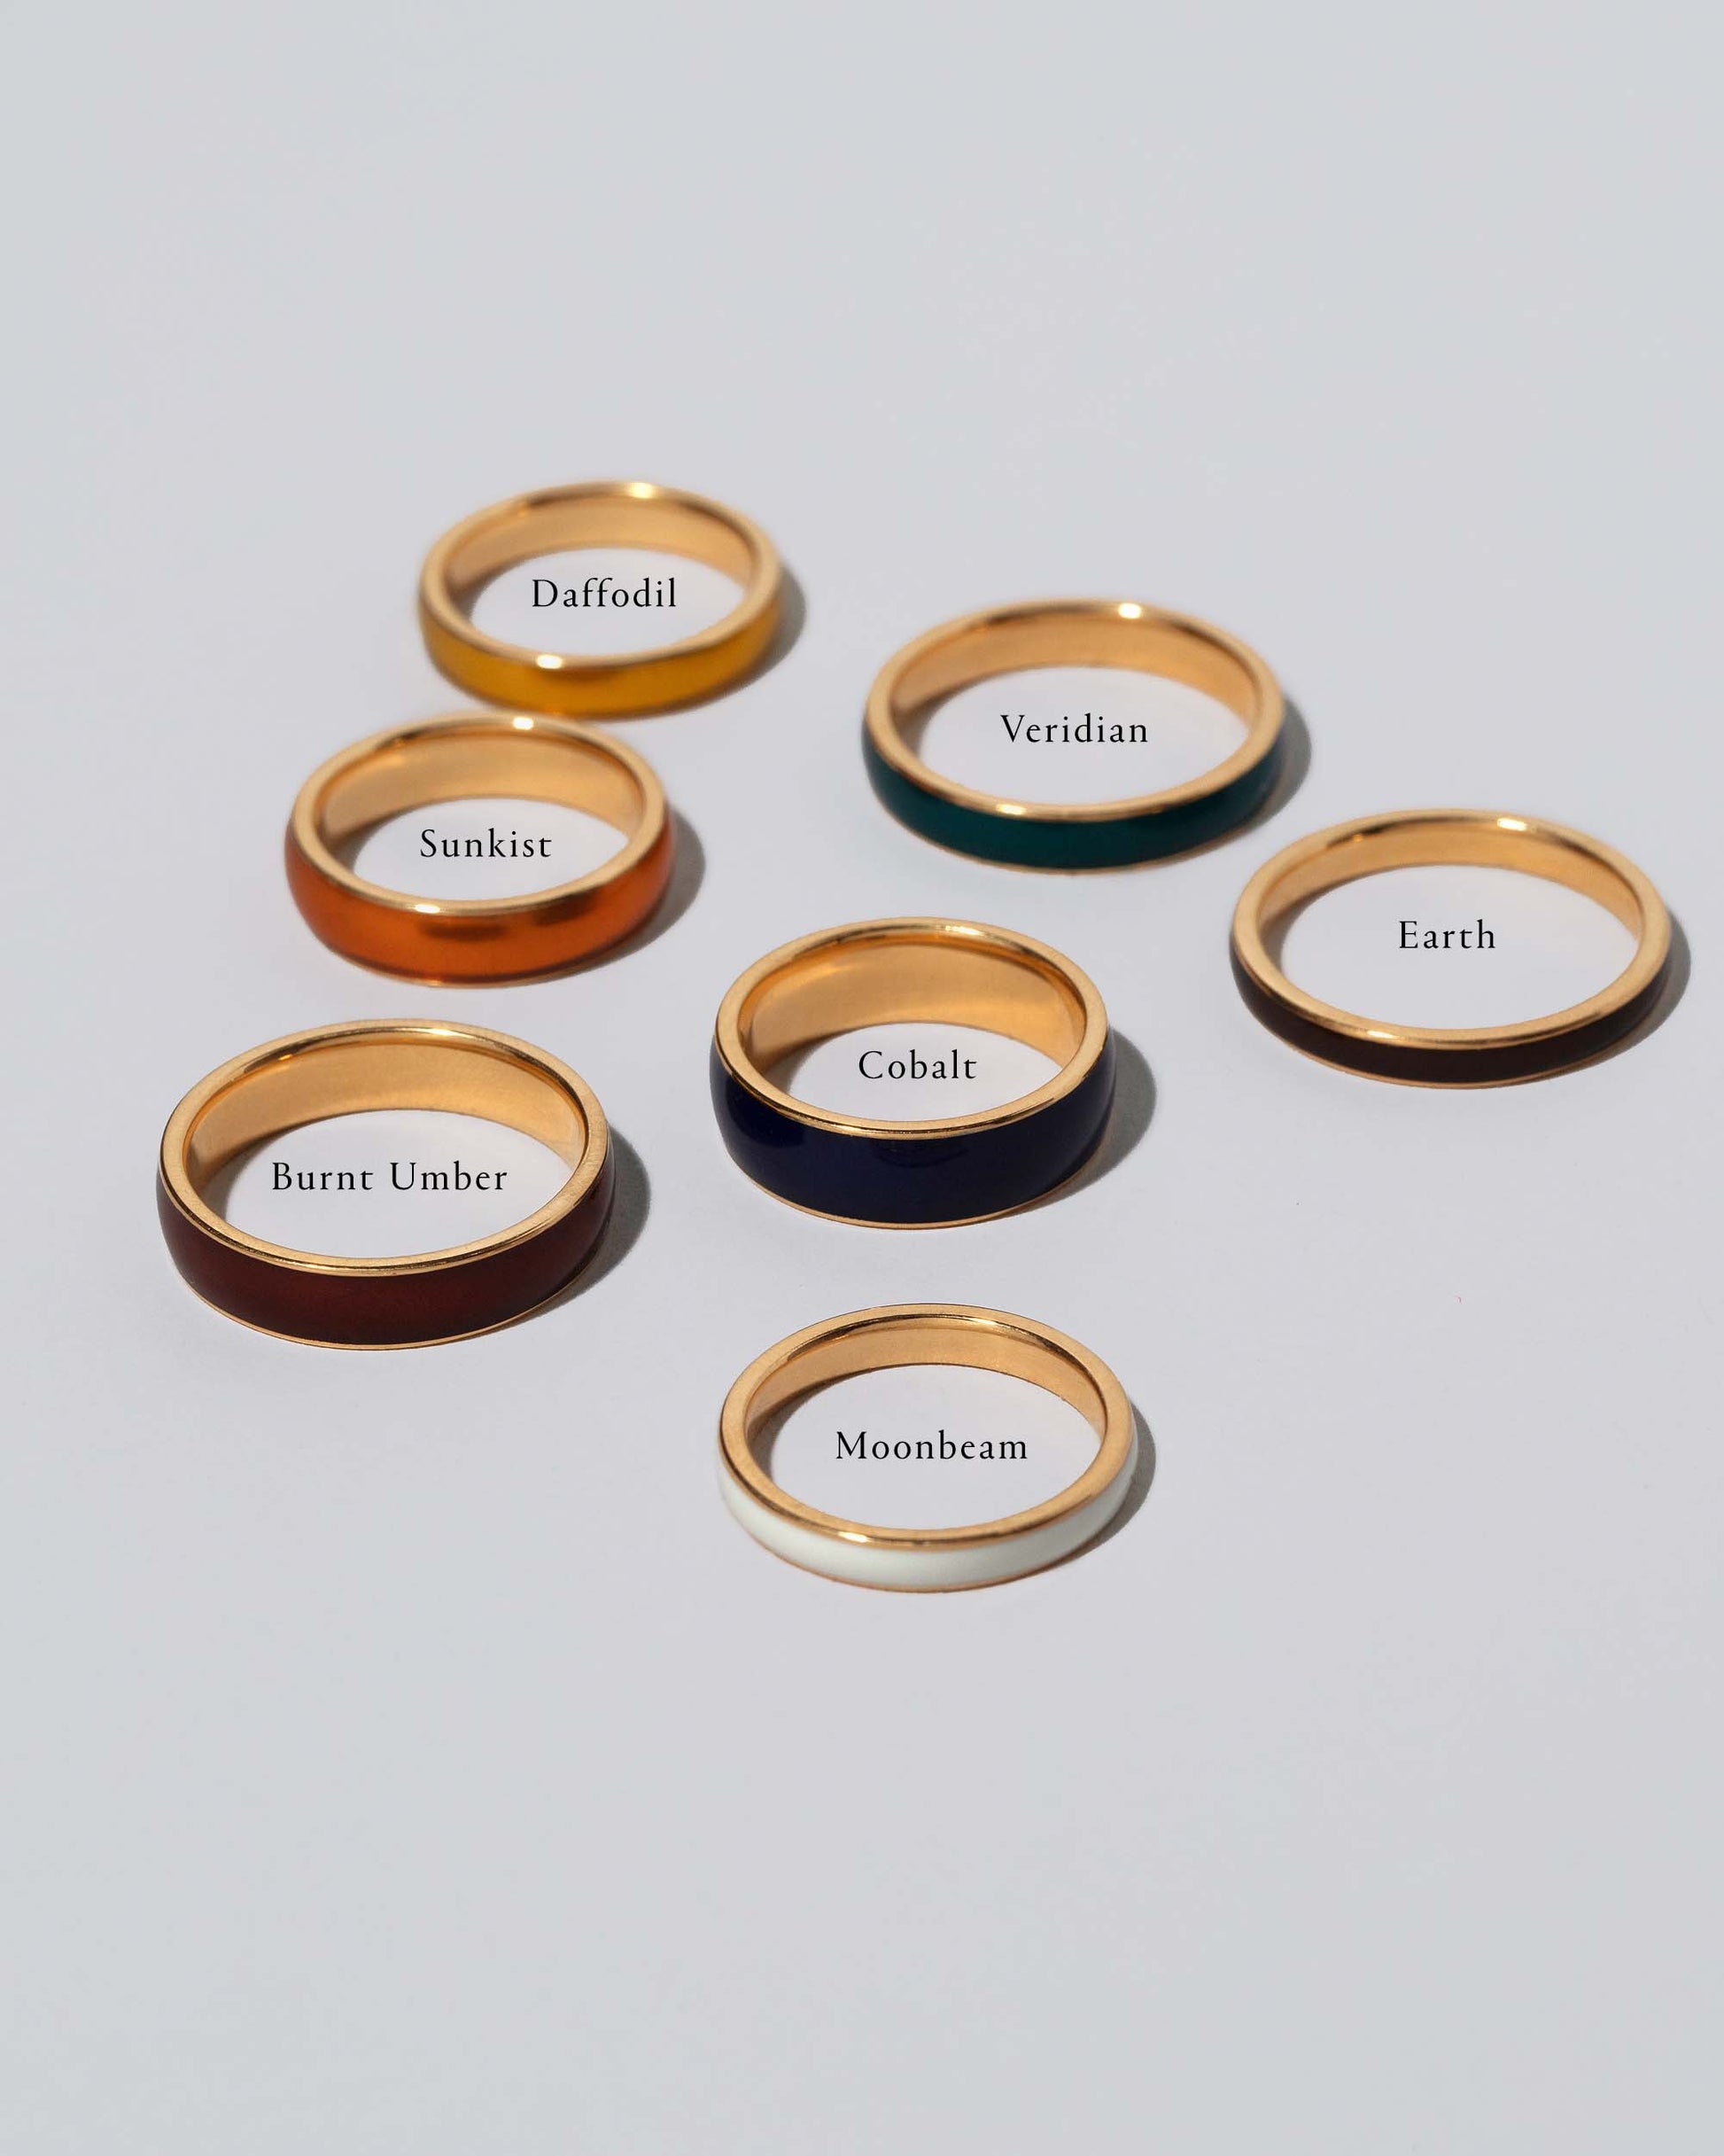 Photograph represents the 3mm size in Moonbeam (Glow in the Dark) and Earth (Deep brown); the 4mm size in Daffodil (Yellow) and Veridian (Deep Green), the 5mm size in Sunkist (Orange) and Burnt Umber (Deep Red), and in the 6mm size in Cobalt (Navy Blue) and Ink (Black).